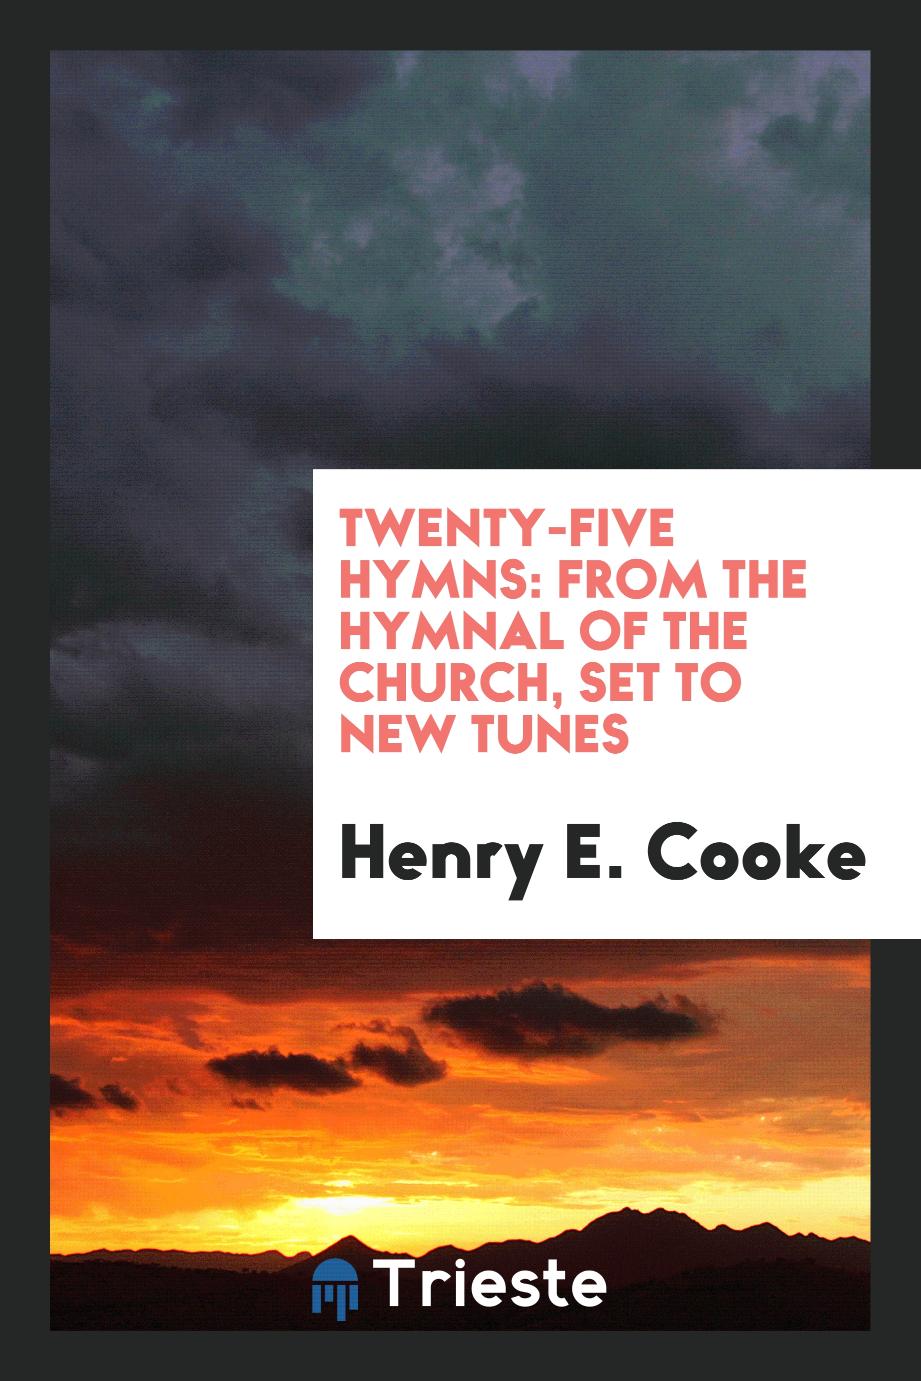 Twenty-five Hymns: From the Hymnal of the Church, Set to New Tunes